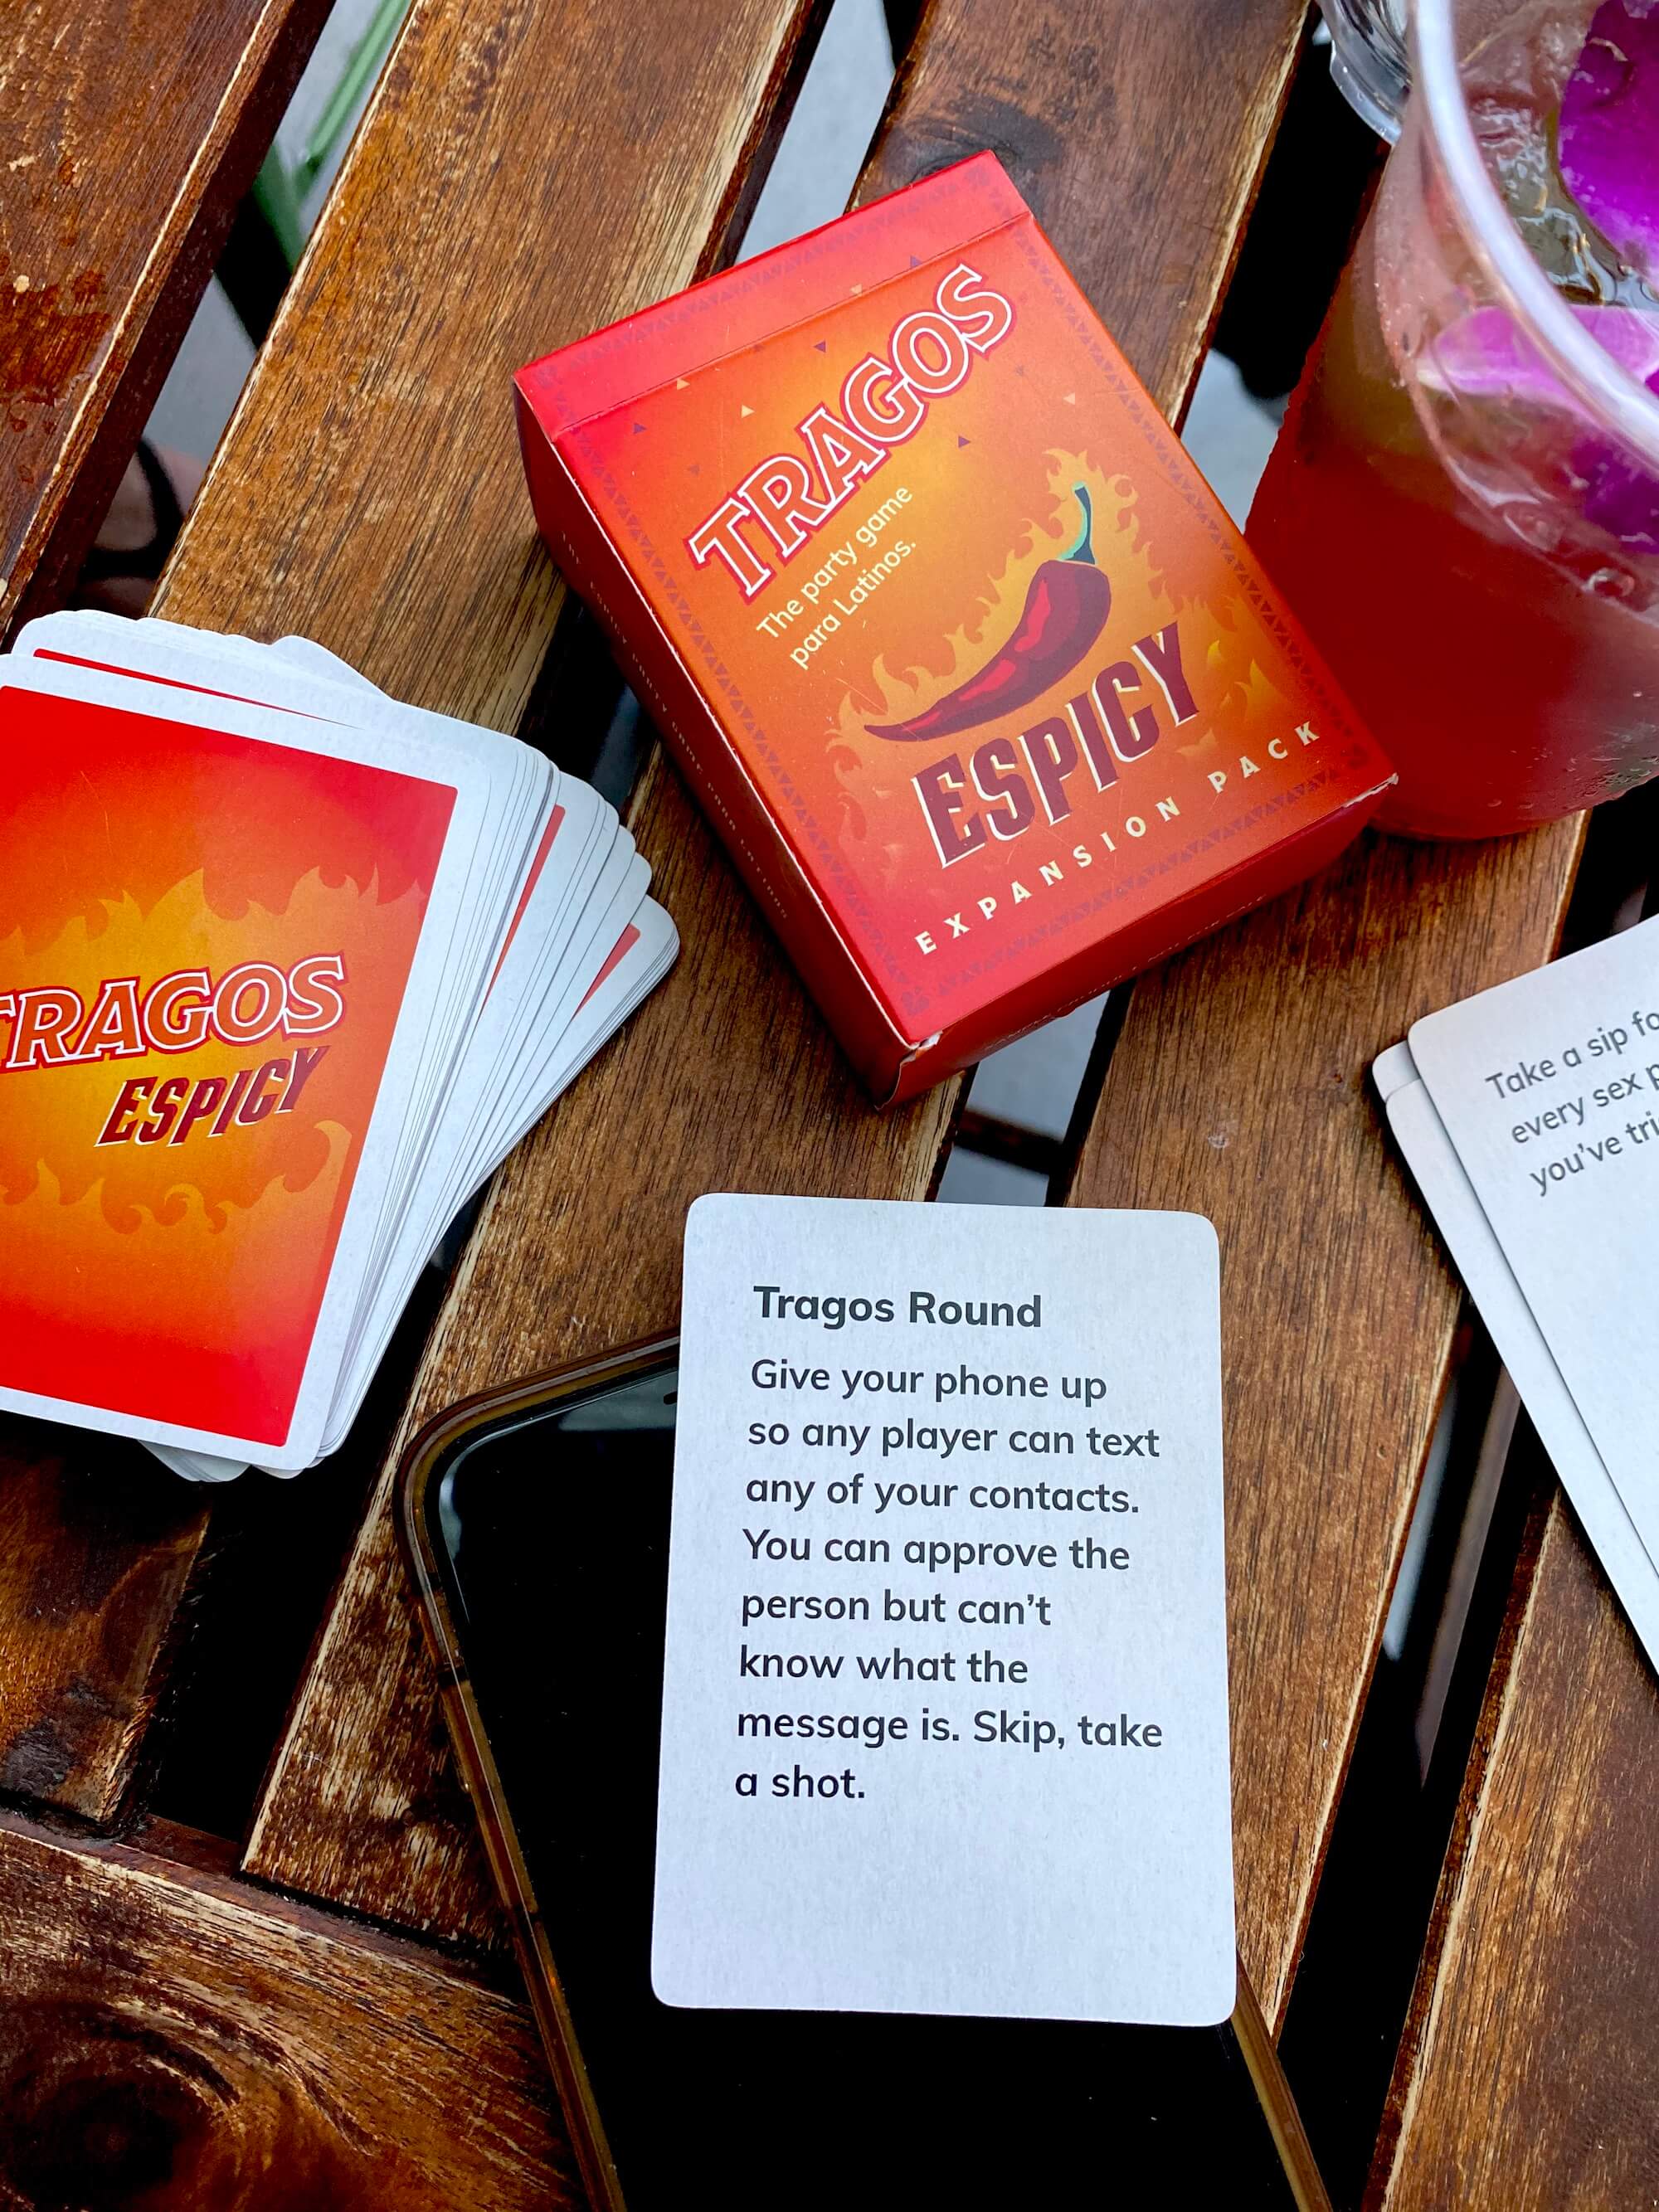 Tragos Espicy Expansion pack full of challenges and Tragos rounds cards. Give your phone up so any player can text any of your contacts. Brunch drinking games with cocktails and cards